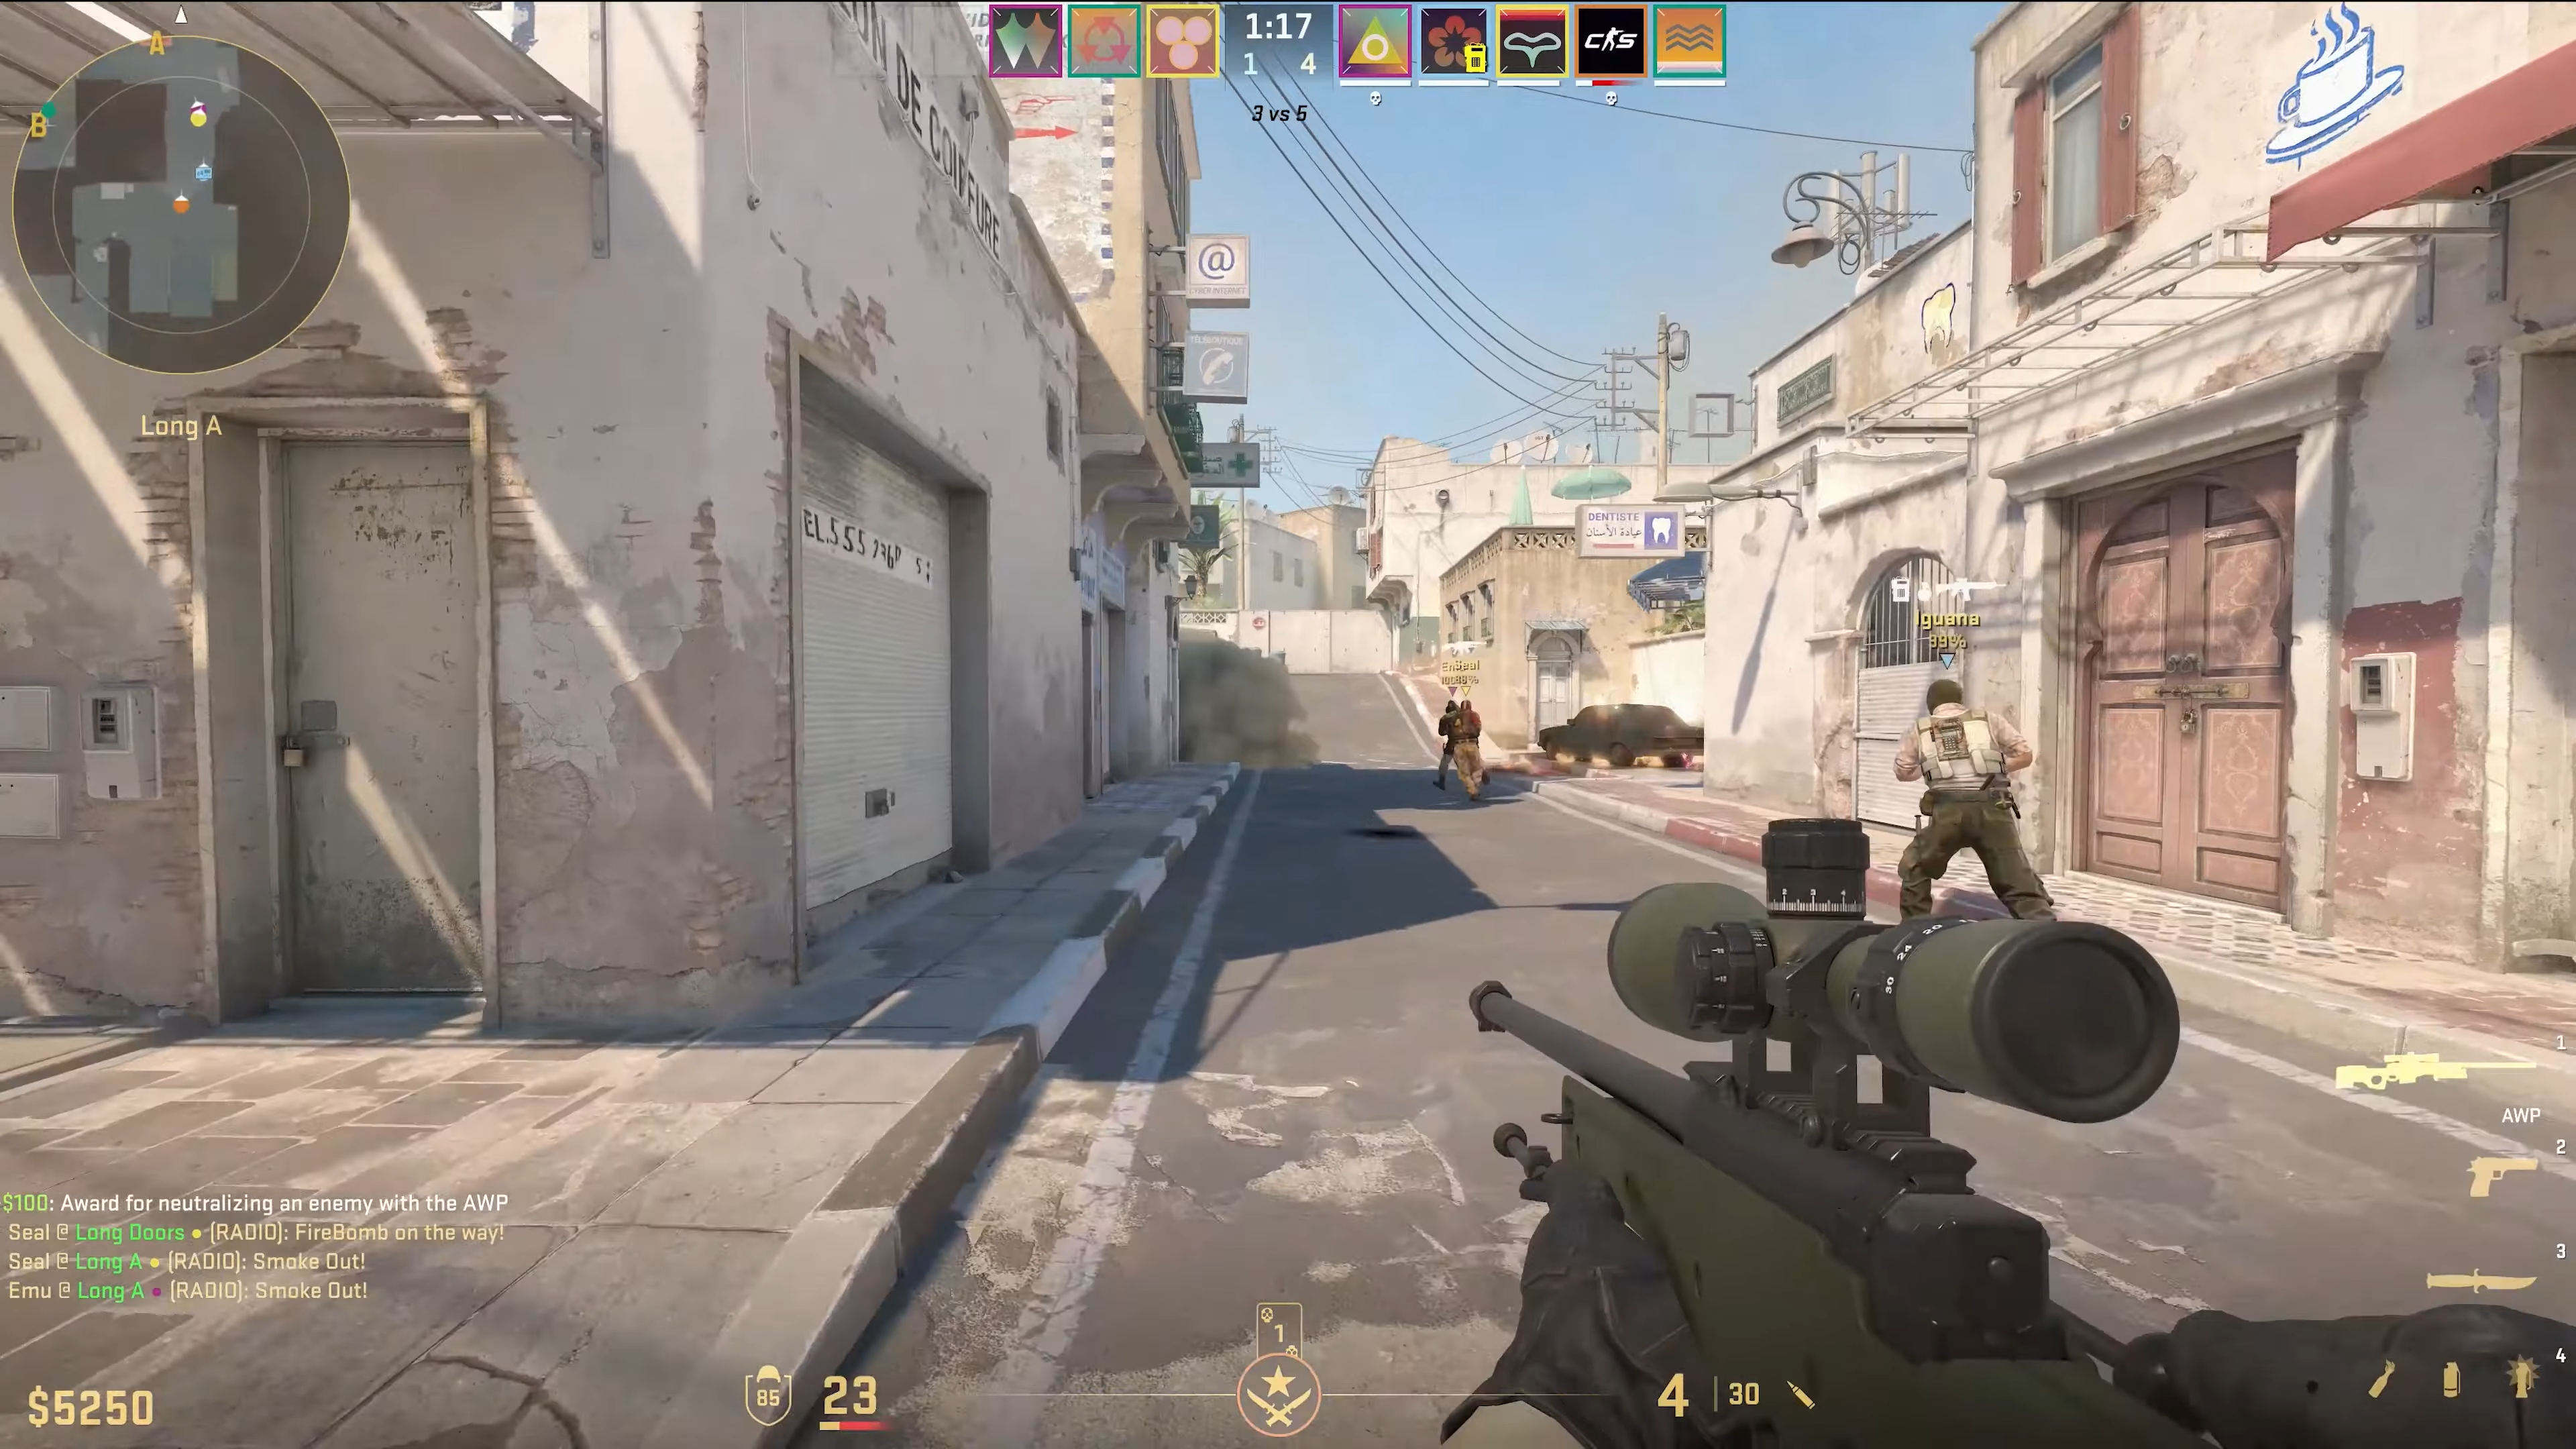 An in-game screenshot of Counter-Strike 2, showing the player walking through a city street carrying a sniper rifle with two other players ahead of them.